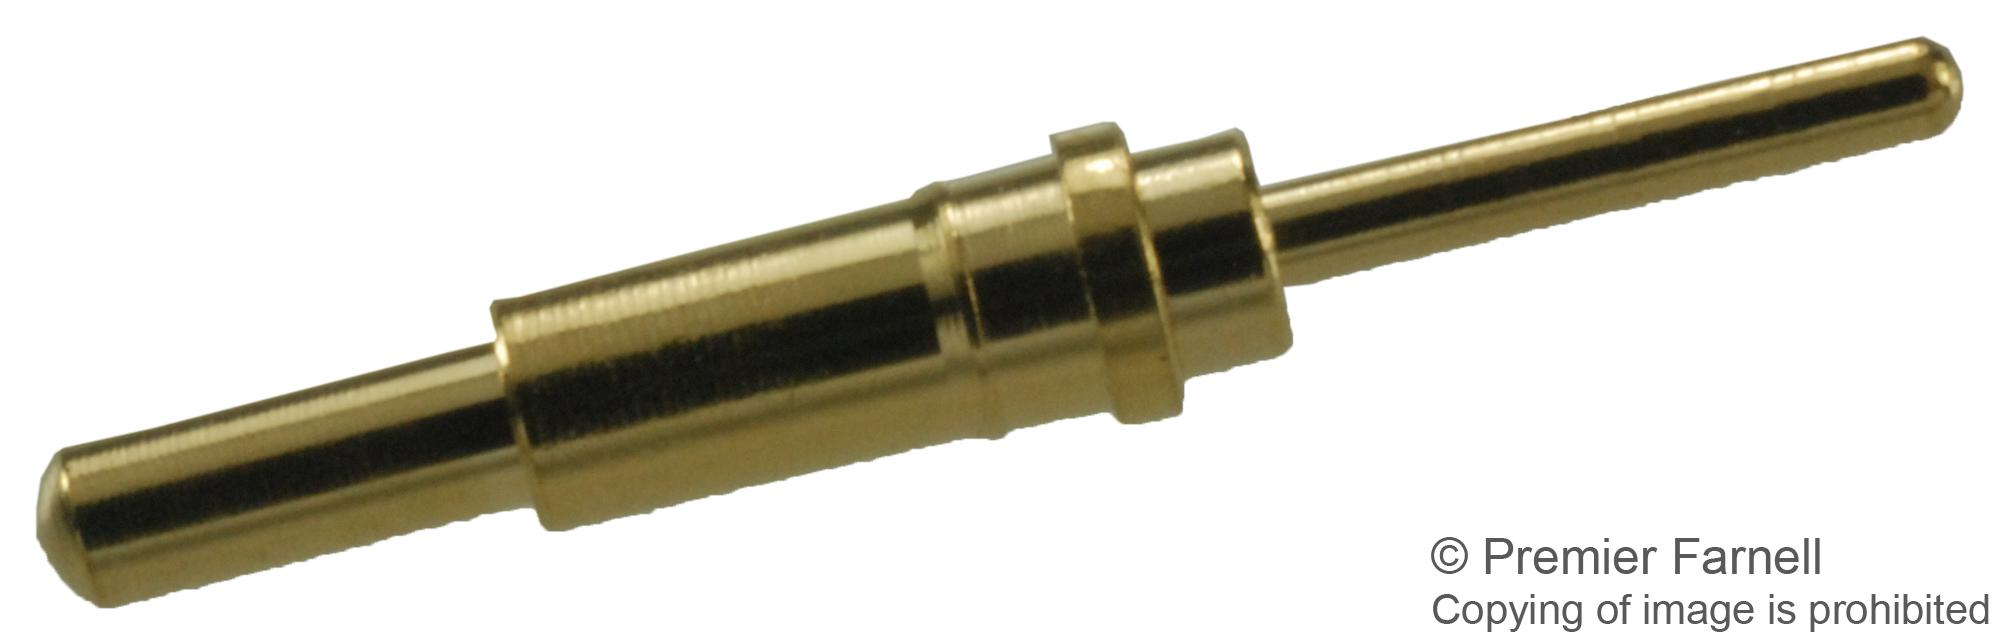 0932-0-15-20-77-14-11-0 SPRING LOADED PIN, 2A, 12MM MILL MAX